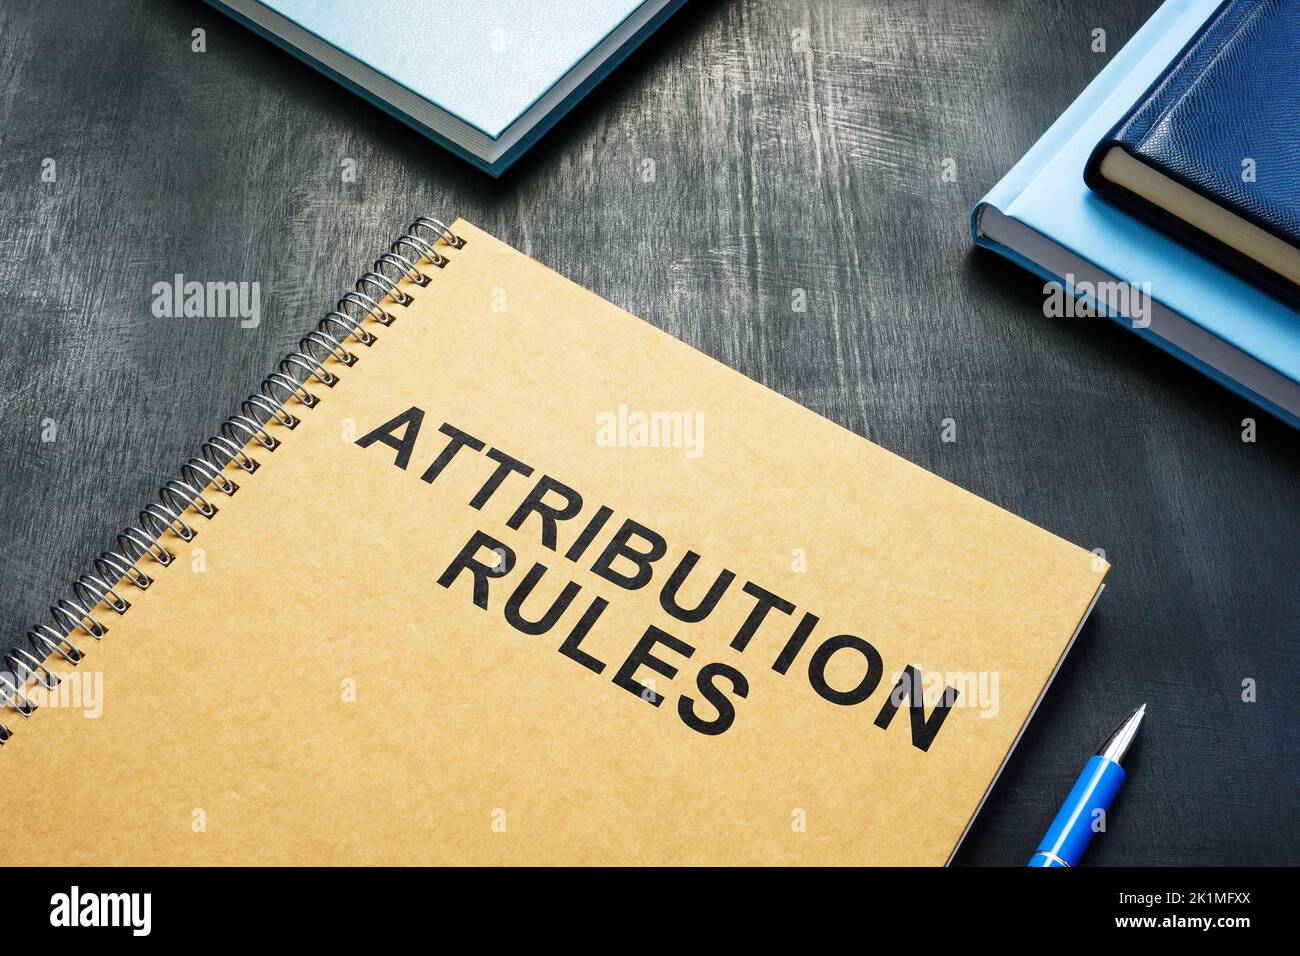 Attribution Rules near a book on the desk. Stock Photo